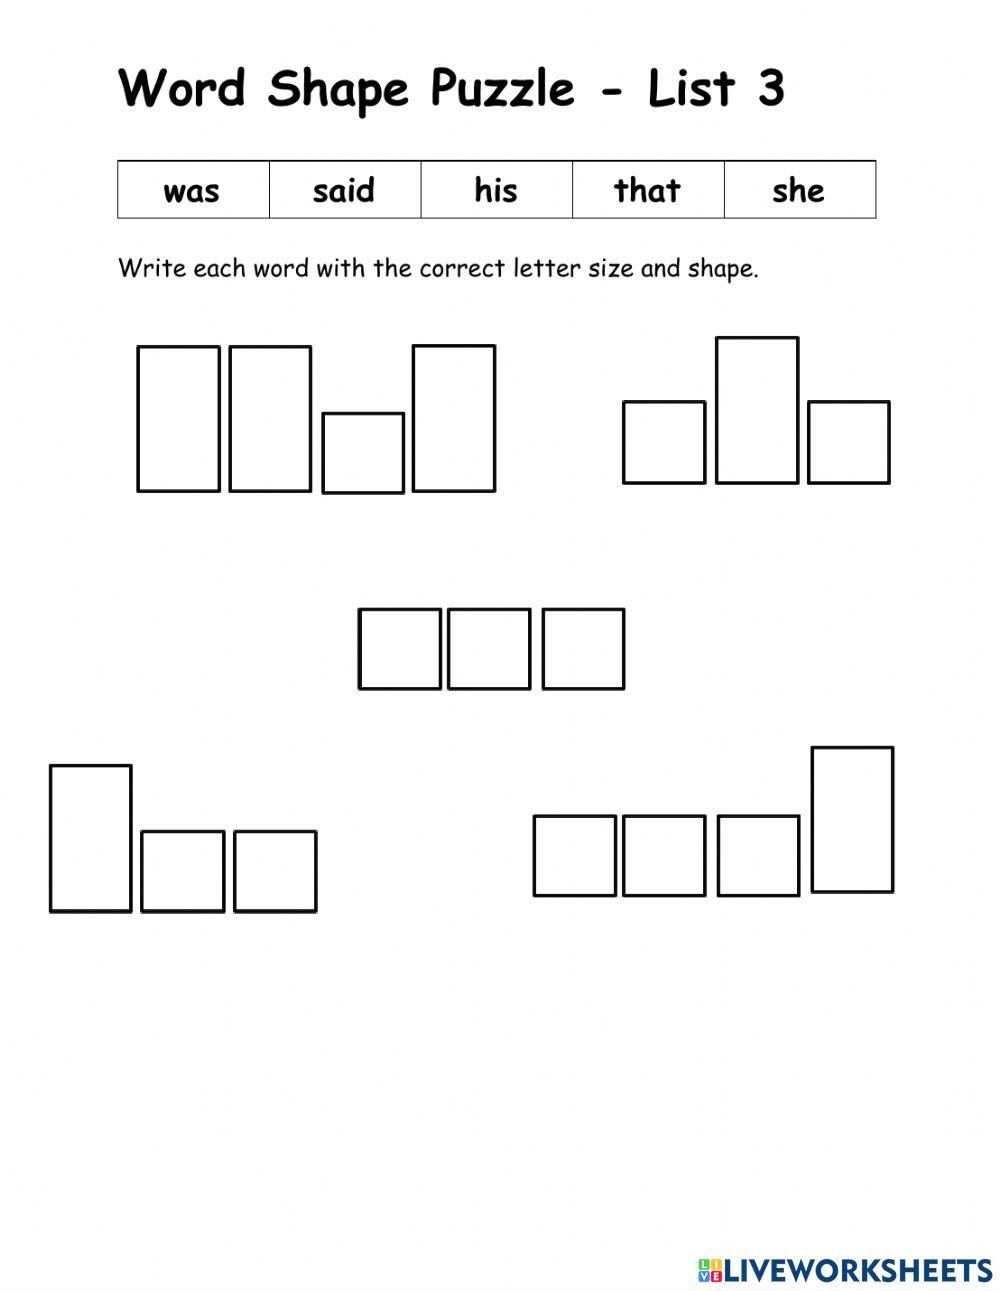 WOW - 5 words - List 3 - Word Shape Puzzle